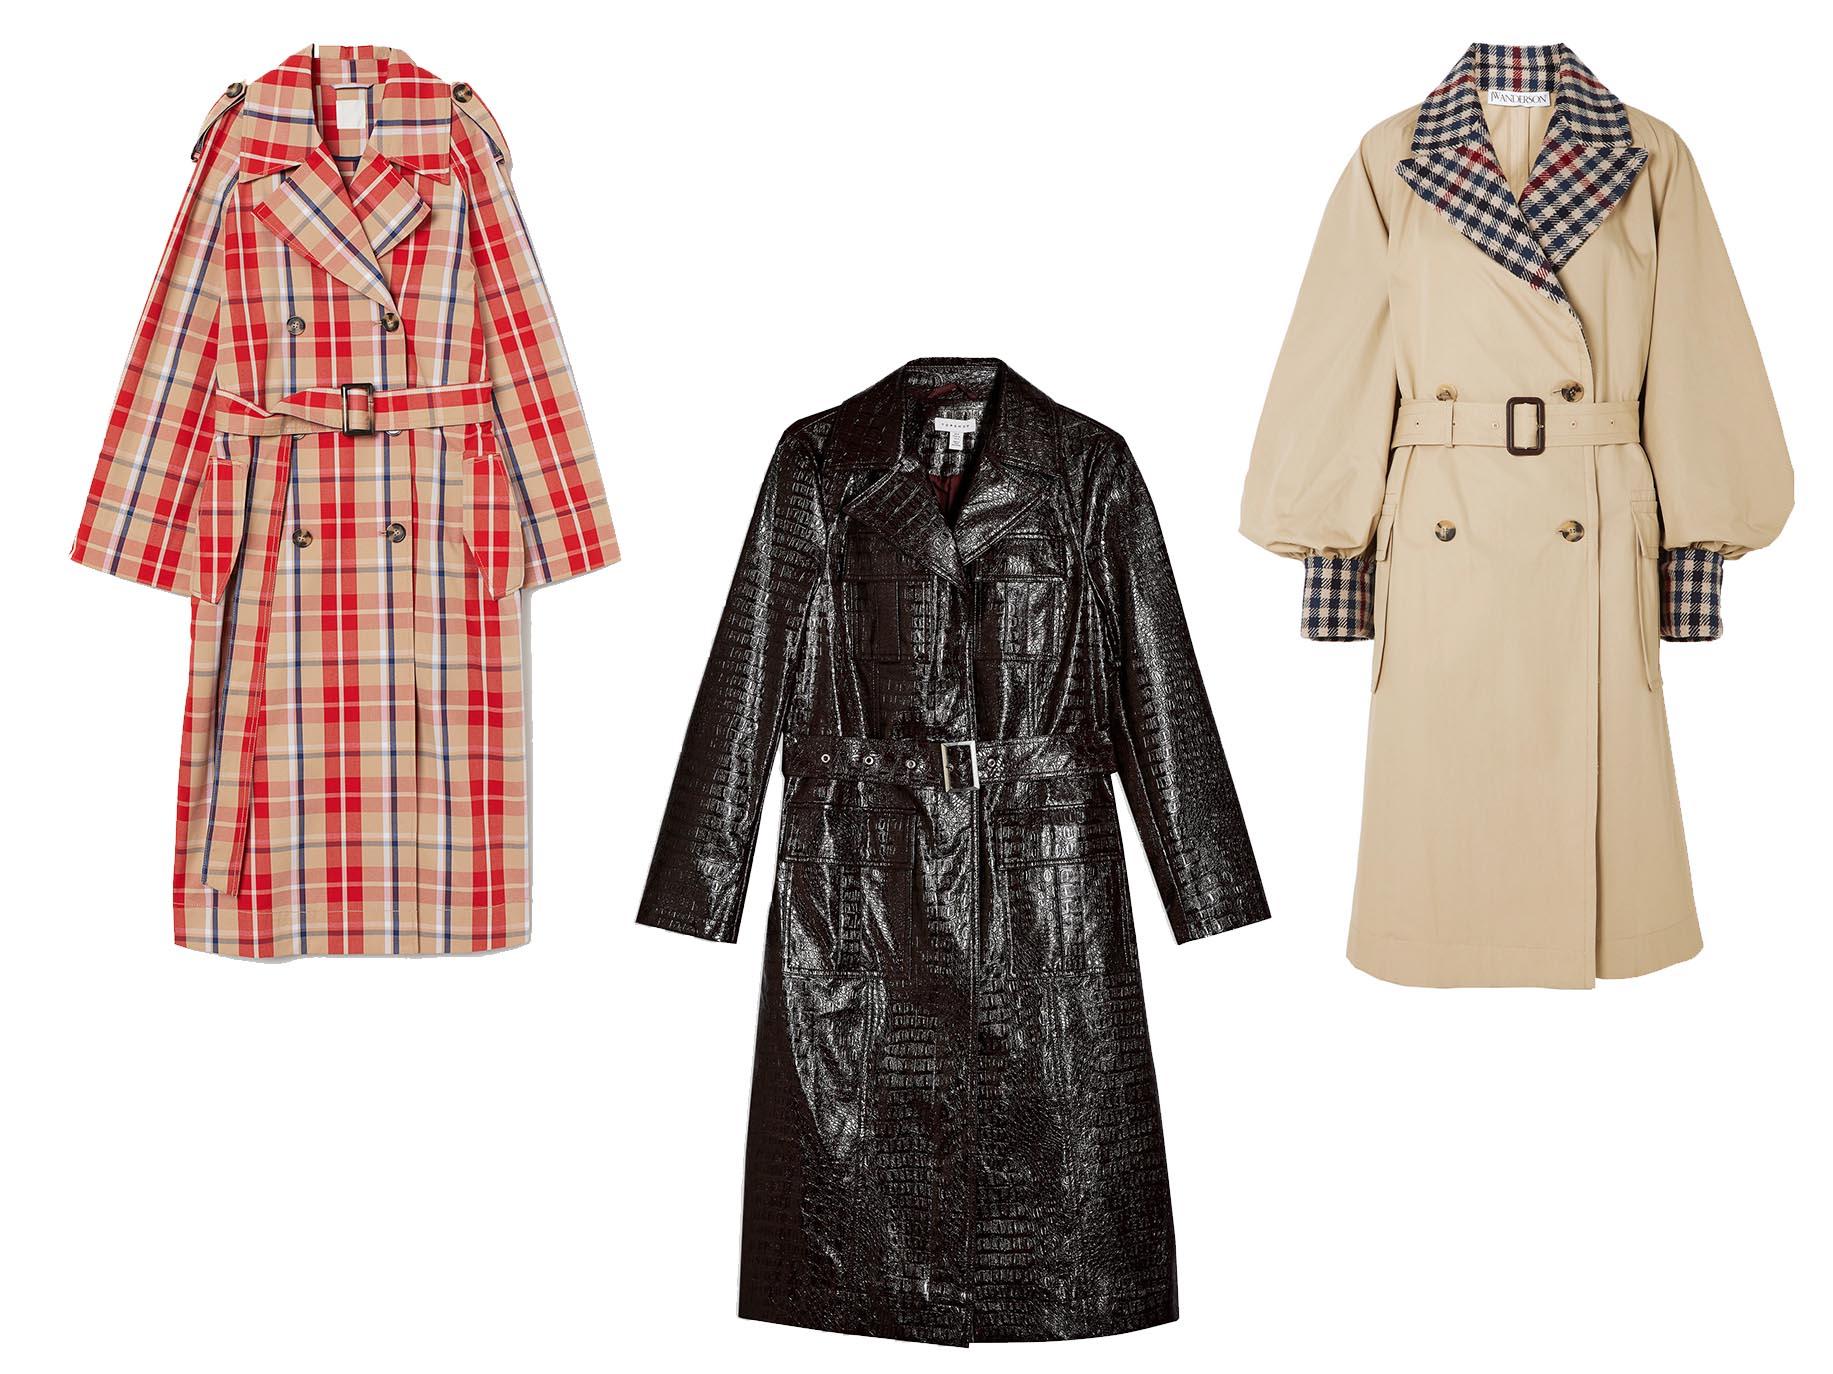 Checked Cotton Trench Coat, £25, H&amp;M; Burgundy Faux Crocodile Vinyl Coat, £79, Topshop; JW Anderson, Belted Trench Coat, £1,350, Net-a-Porter